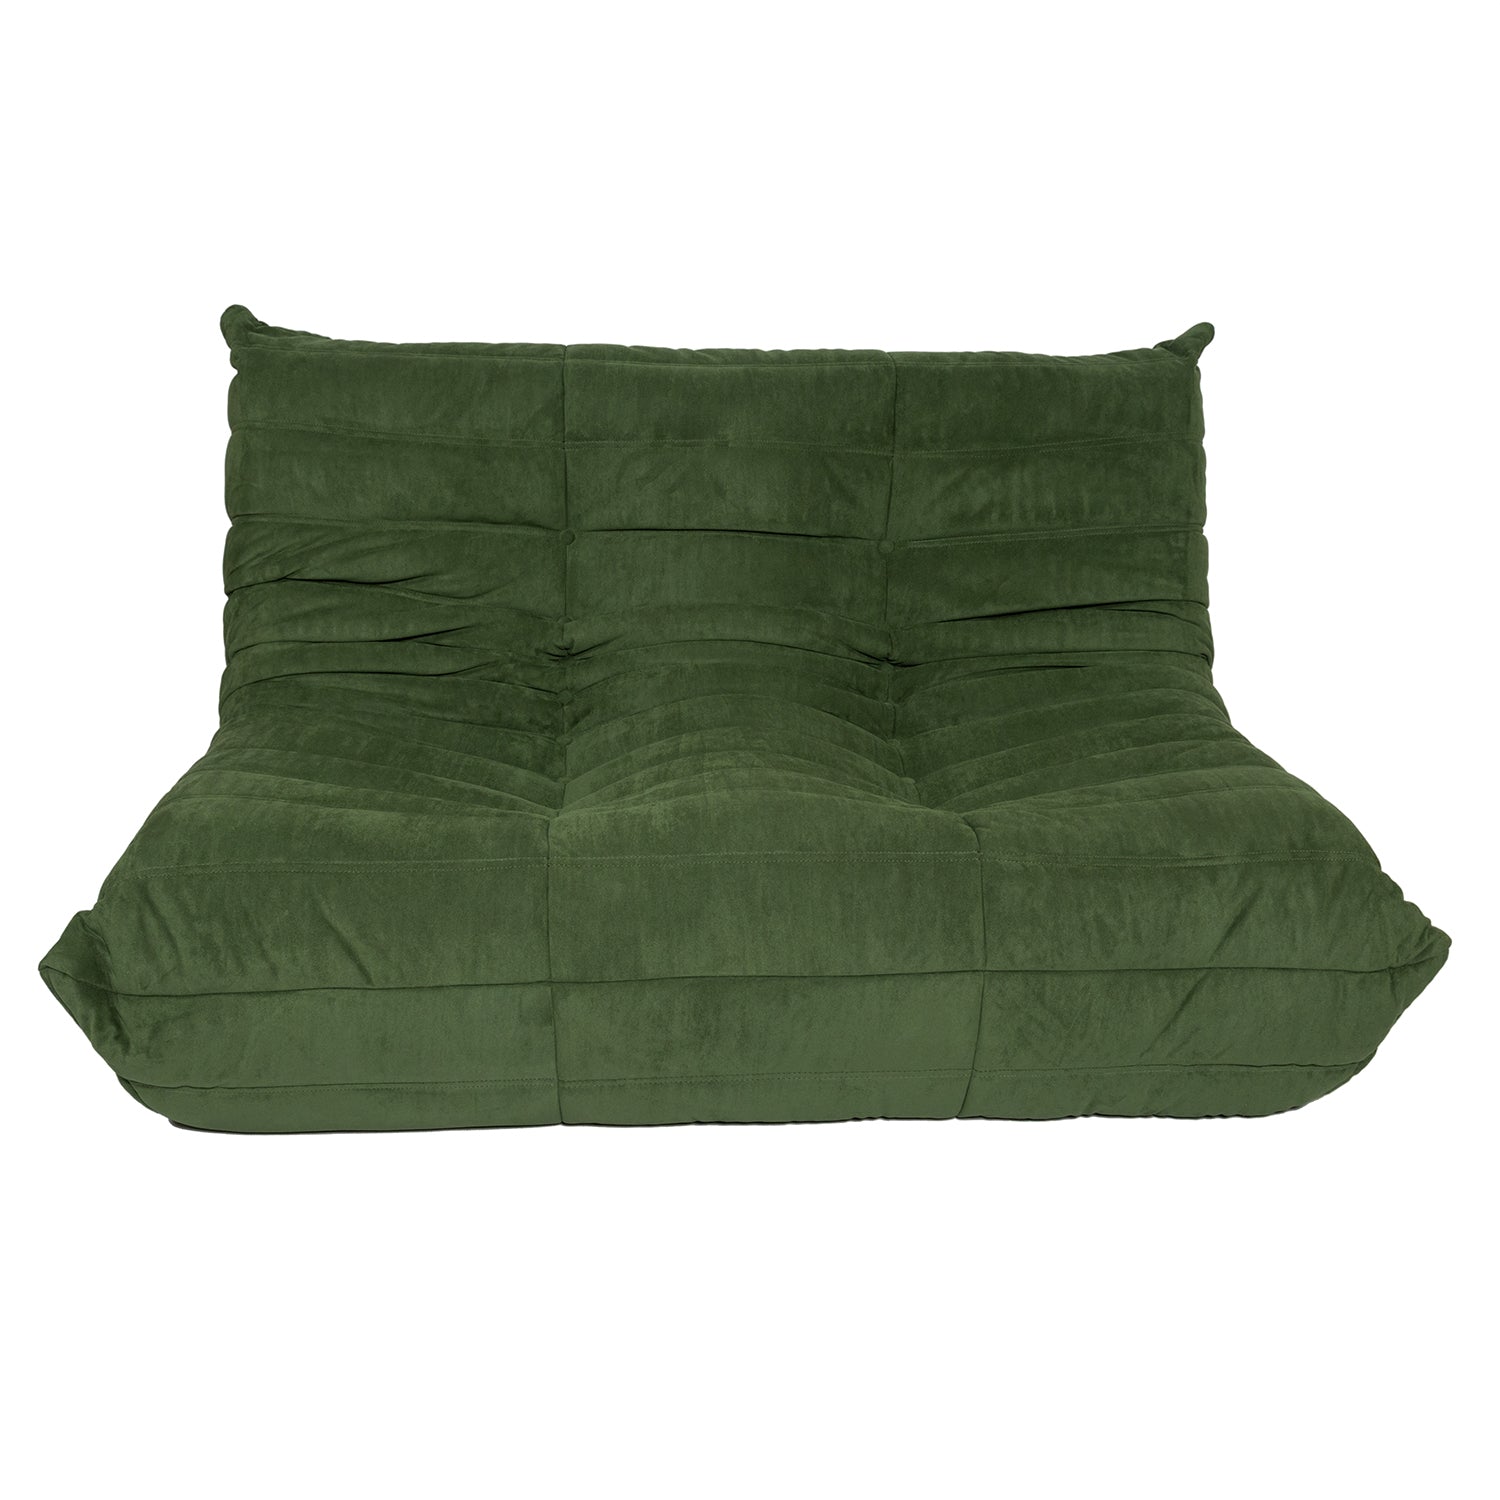 Togo Style Sofa Green Suede 2 Seater